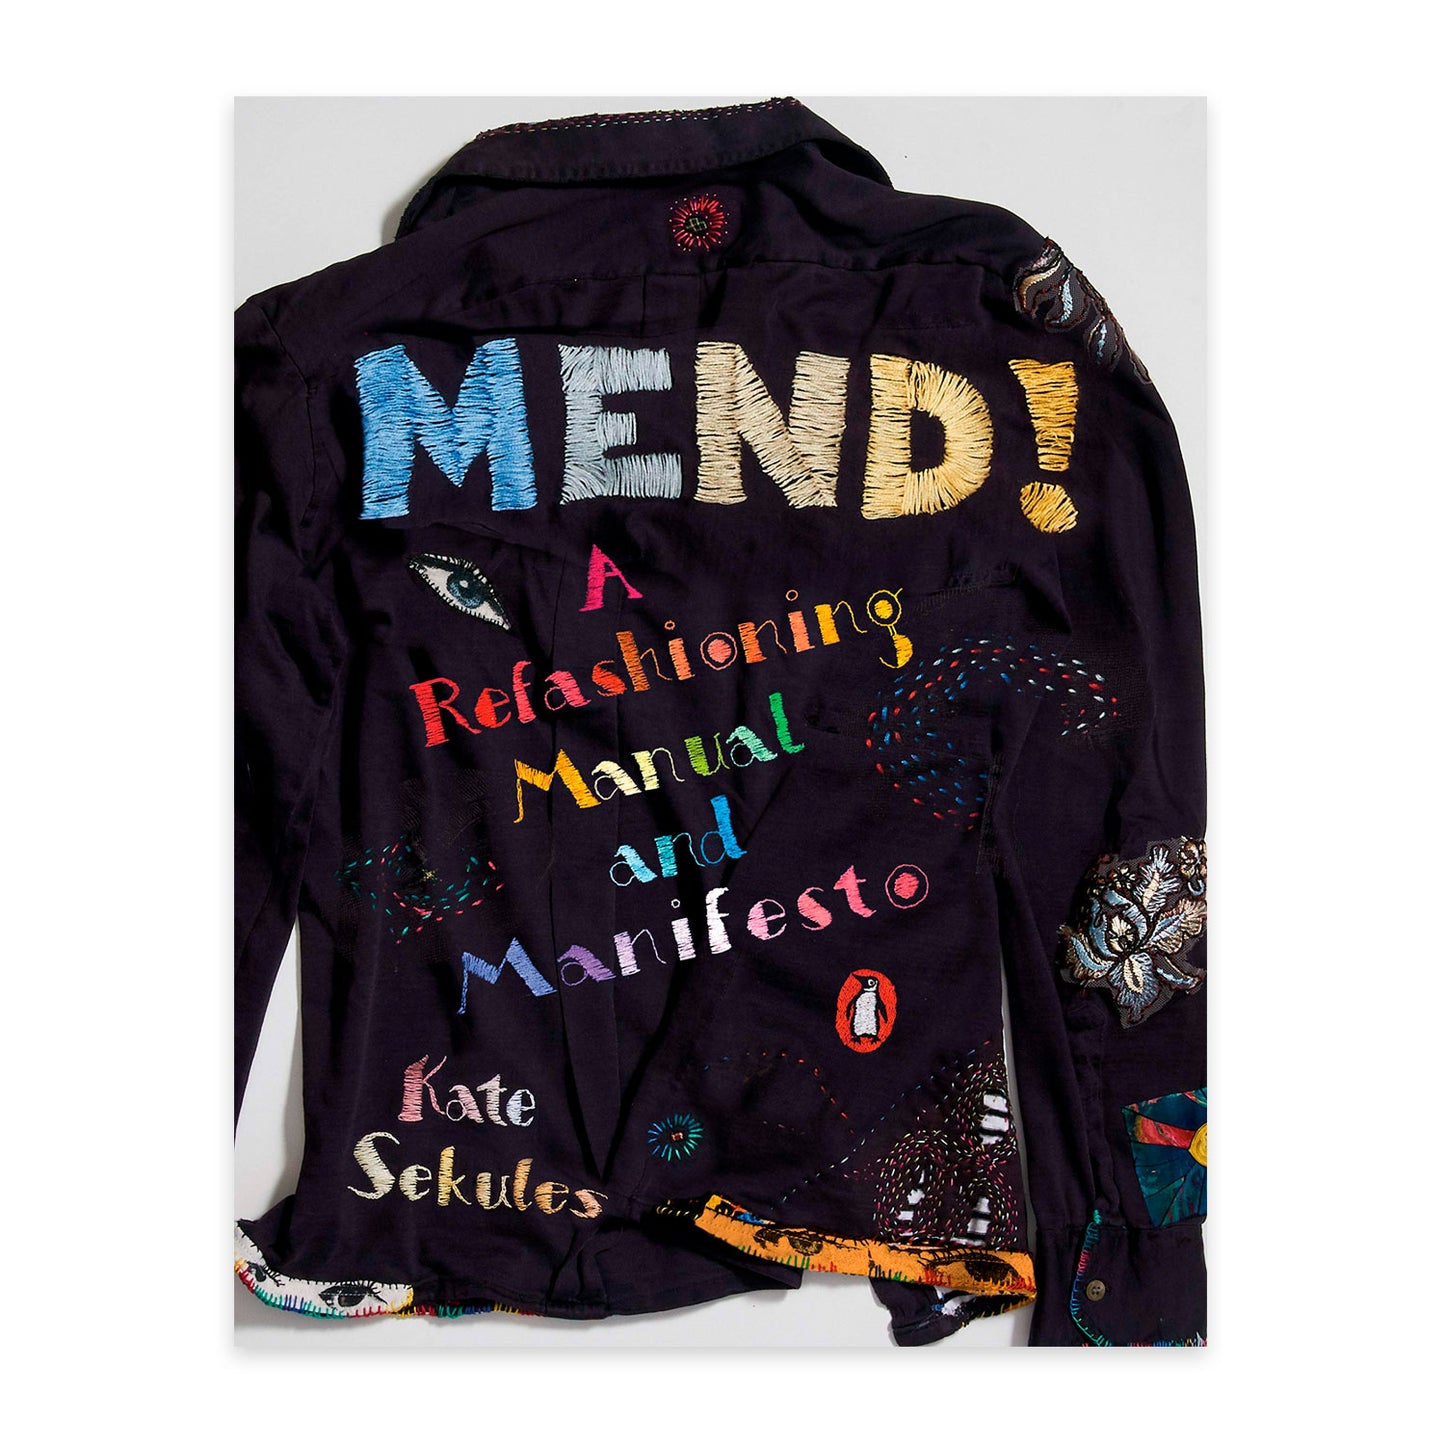 Mend! A Refashioning Manual and Manifesto